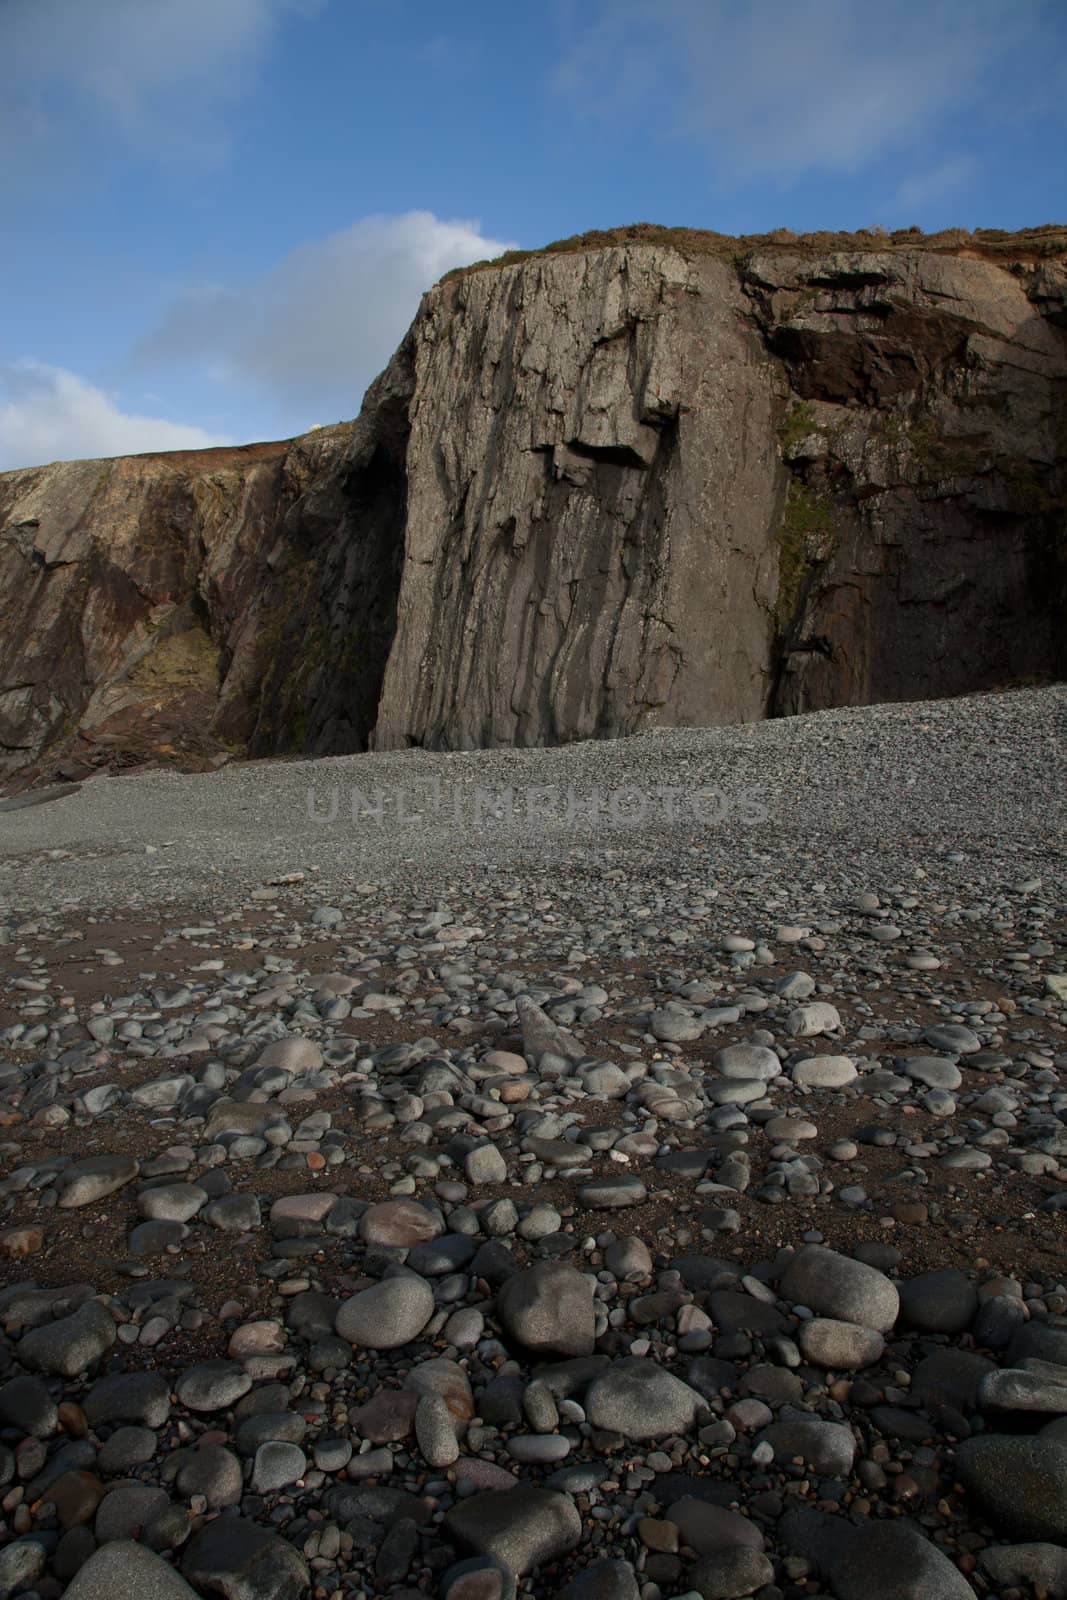 A pebble shore leads to a shale buttress on a cliff with blue sky and cloud in the distance.